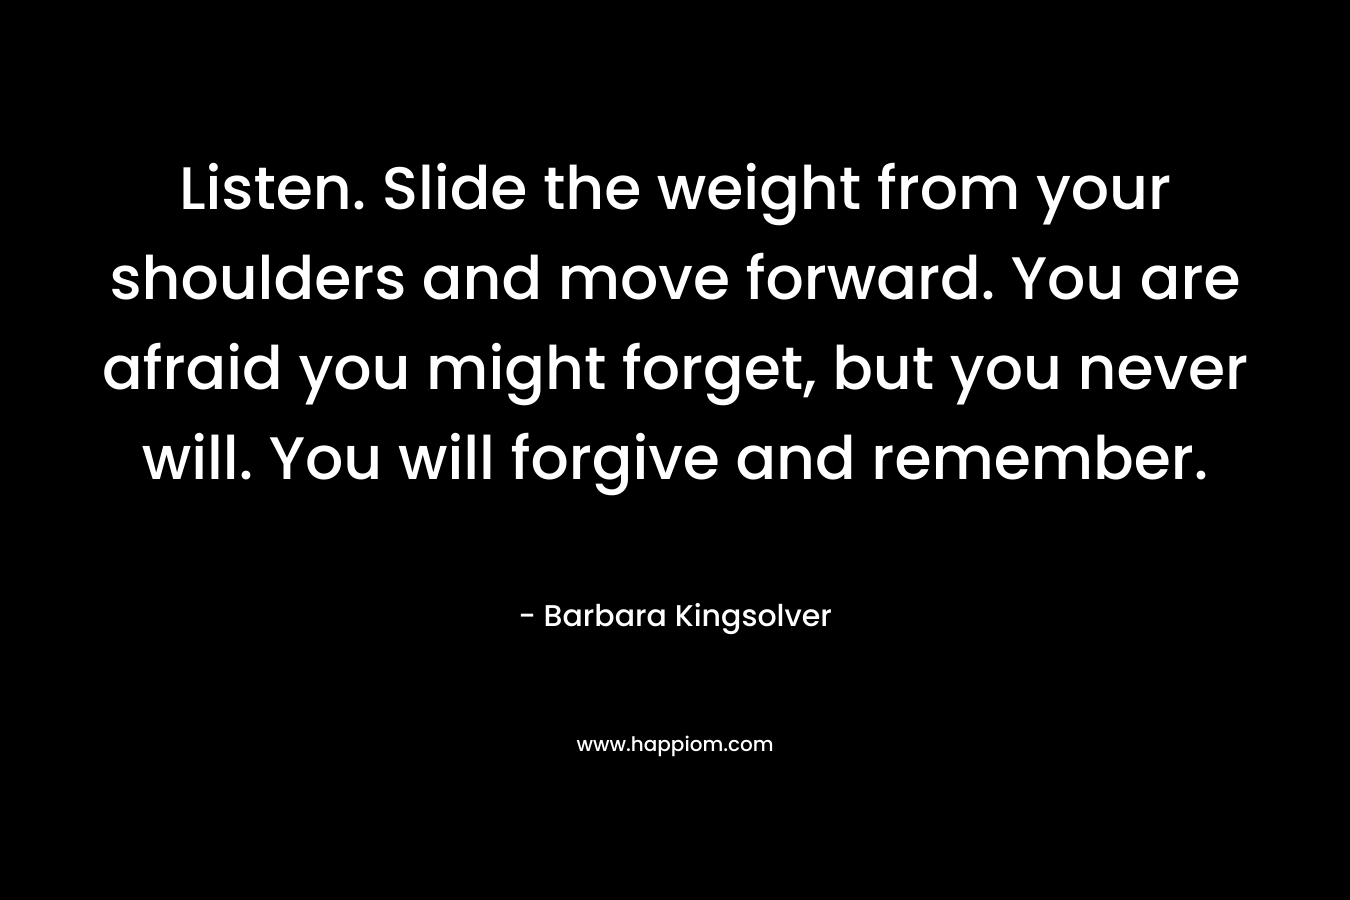 Listen. Slide the weight from your shoulders and move forward. You are afraid you might forget, but you never will. You will forgive and remember.